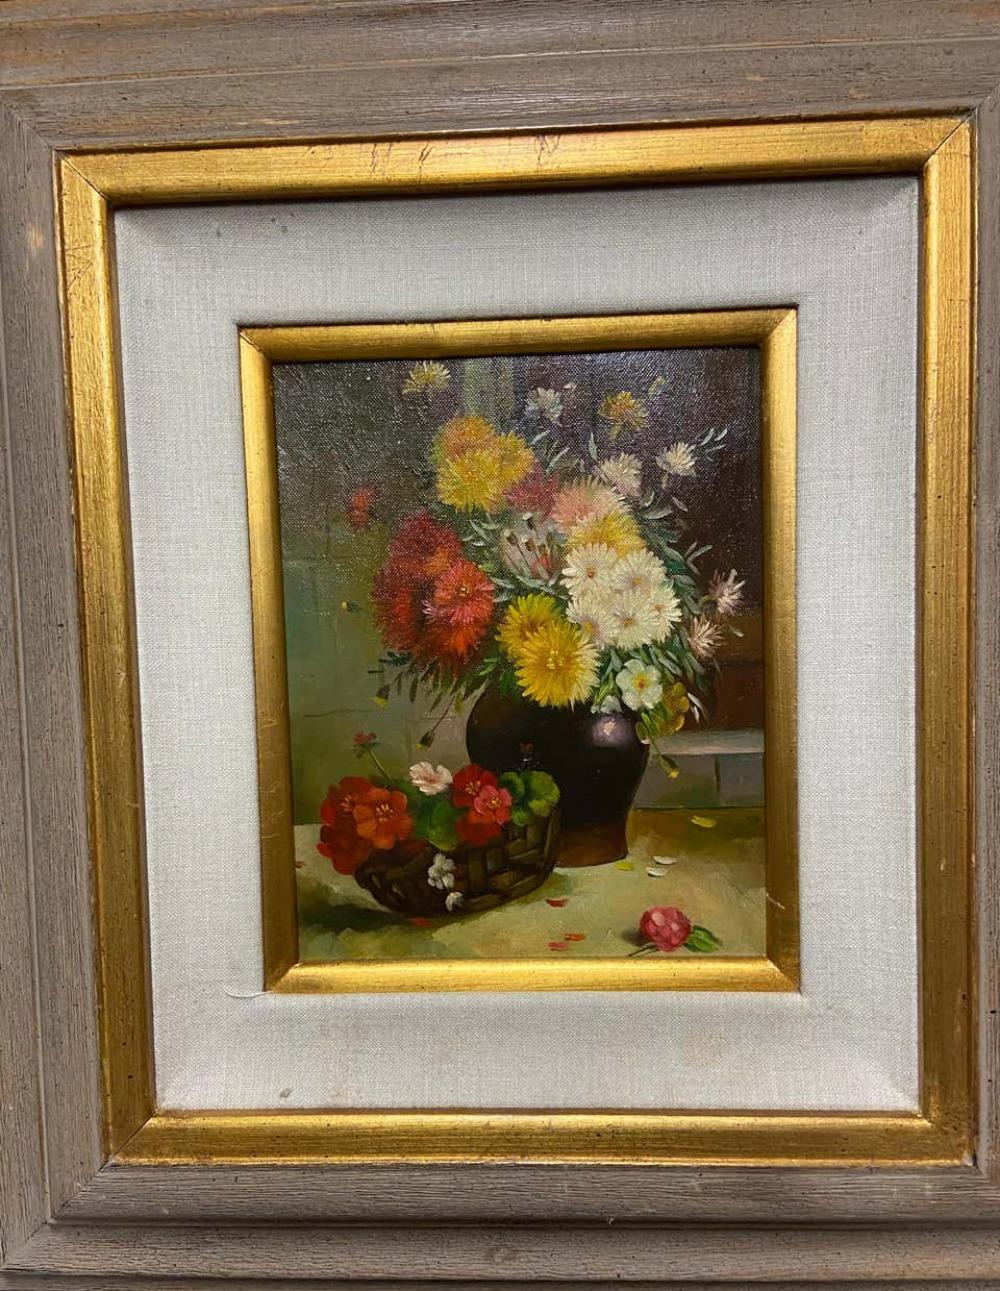 This is an oil on canvas painting depicting a still life with flowers. The piece was made in the 1980s. 

Framed: 21.5